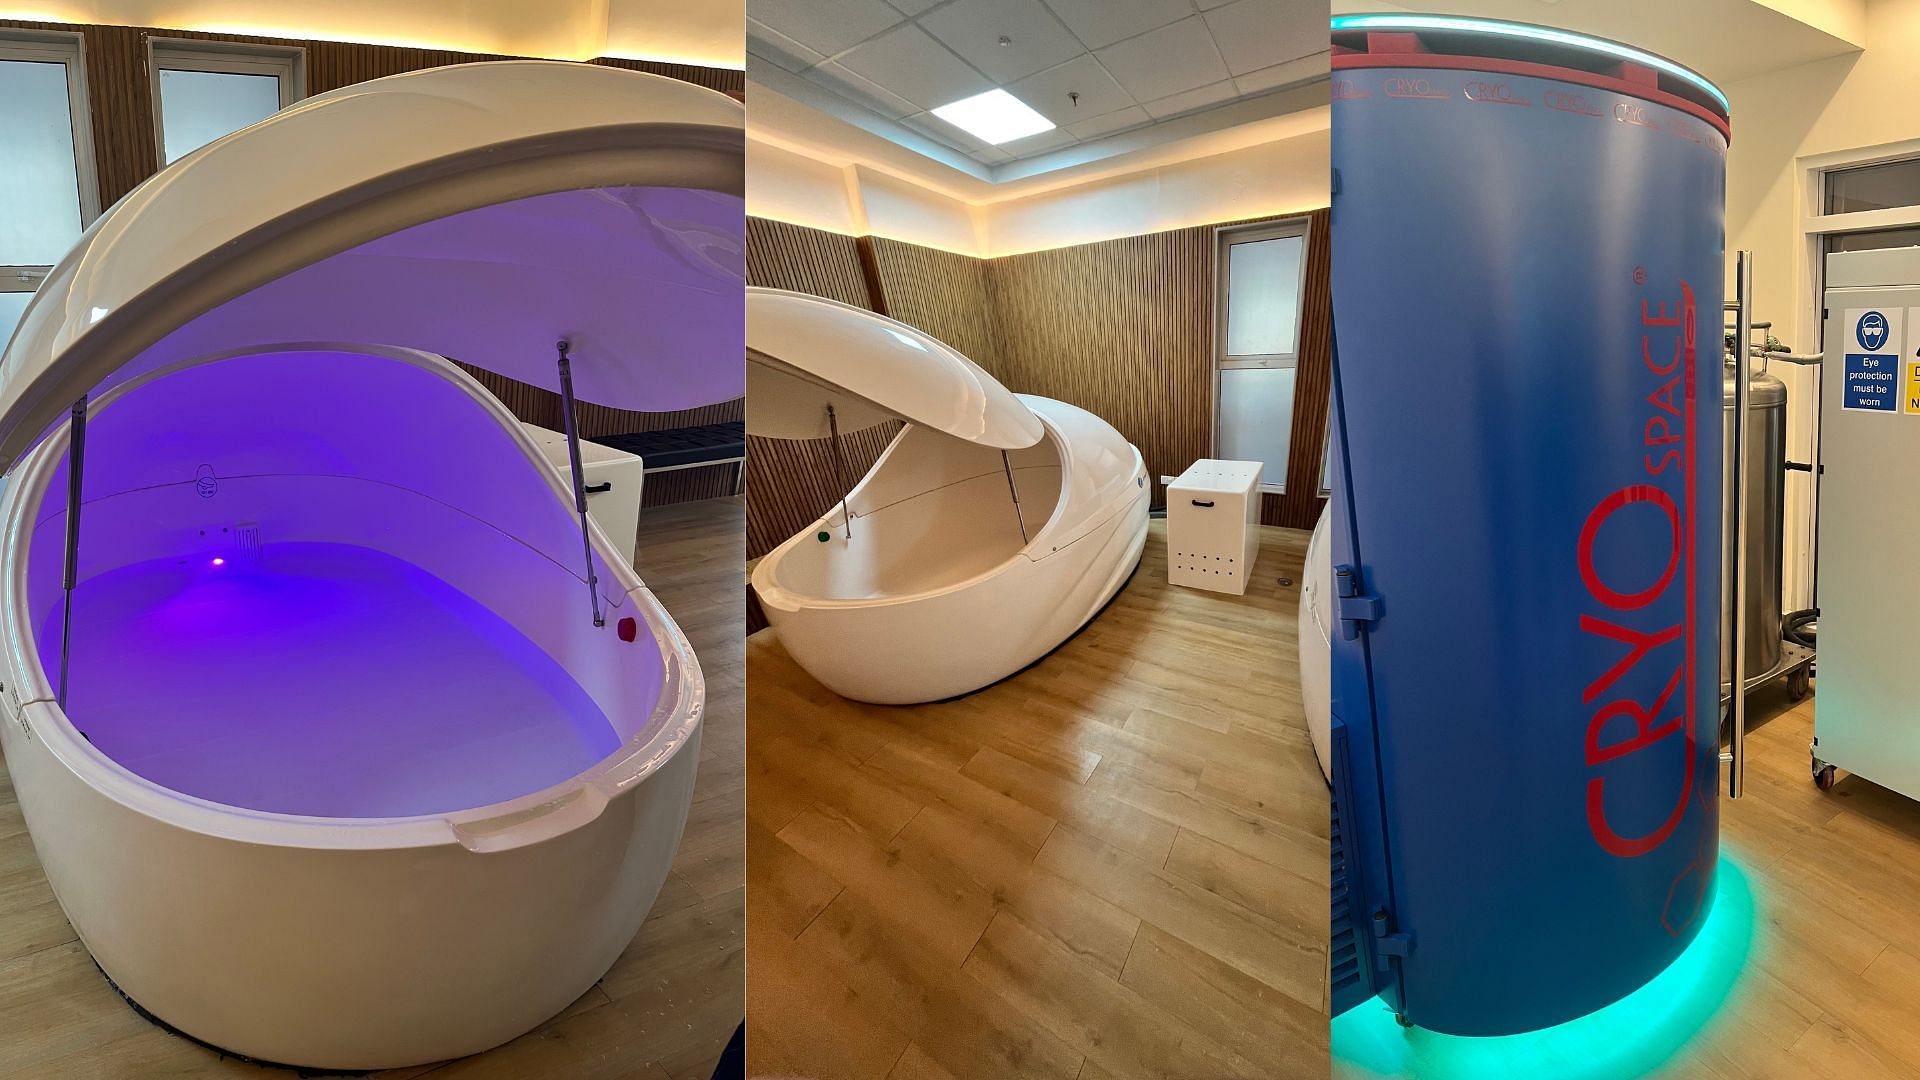 The DreamPod (left and centre) and the Cryogenic Therapy machine (right). (Picture Credits: Maanas Upadhyay)